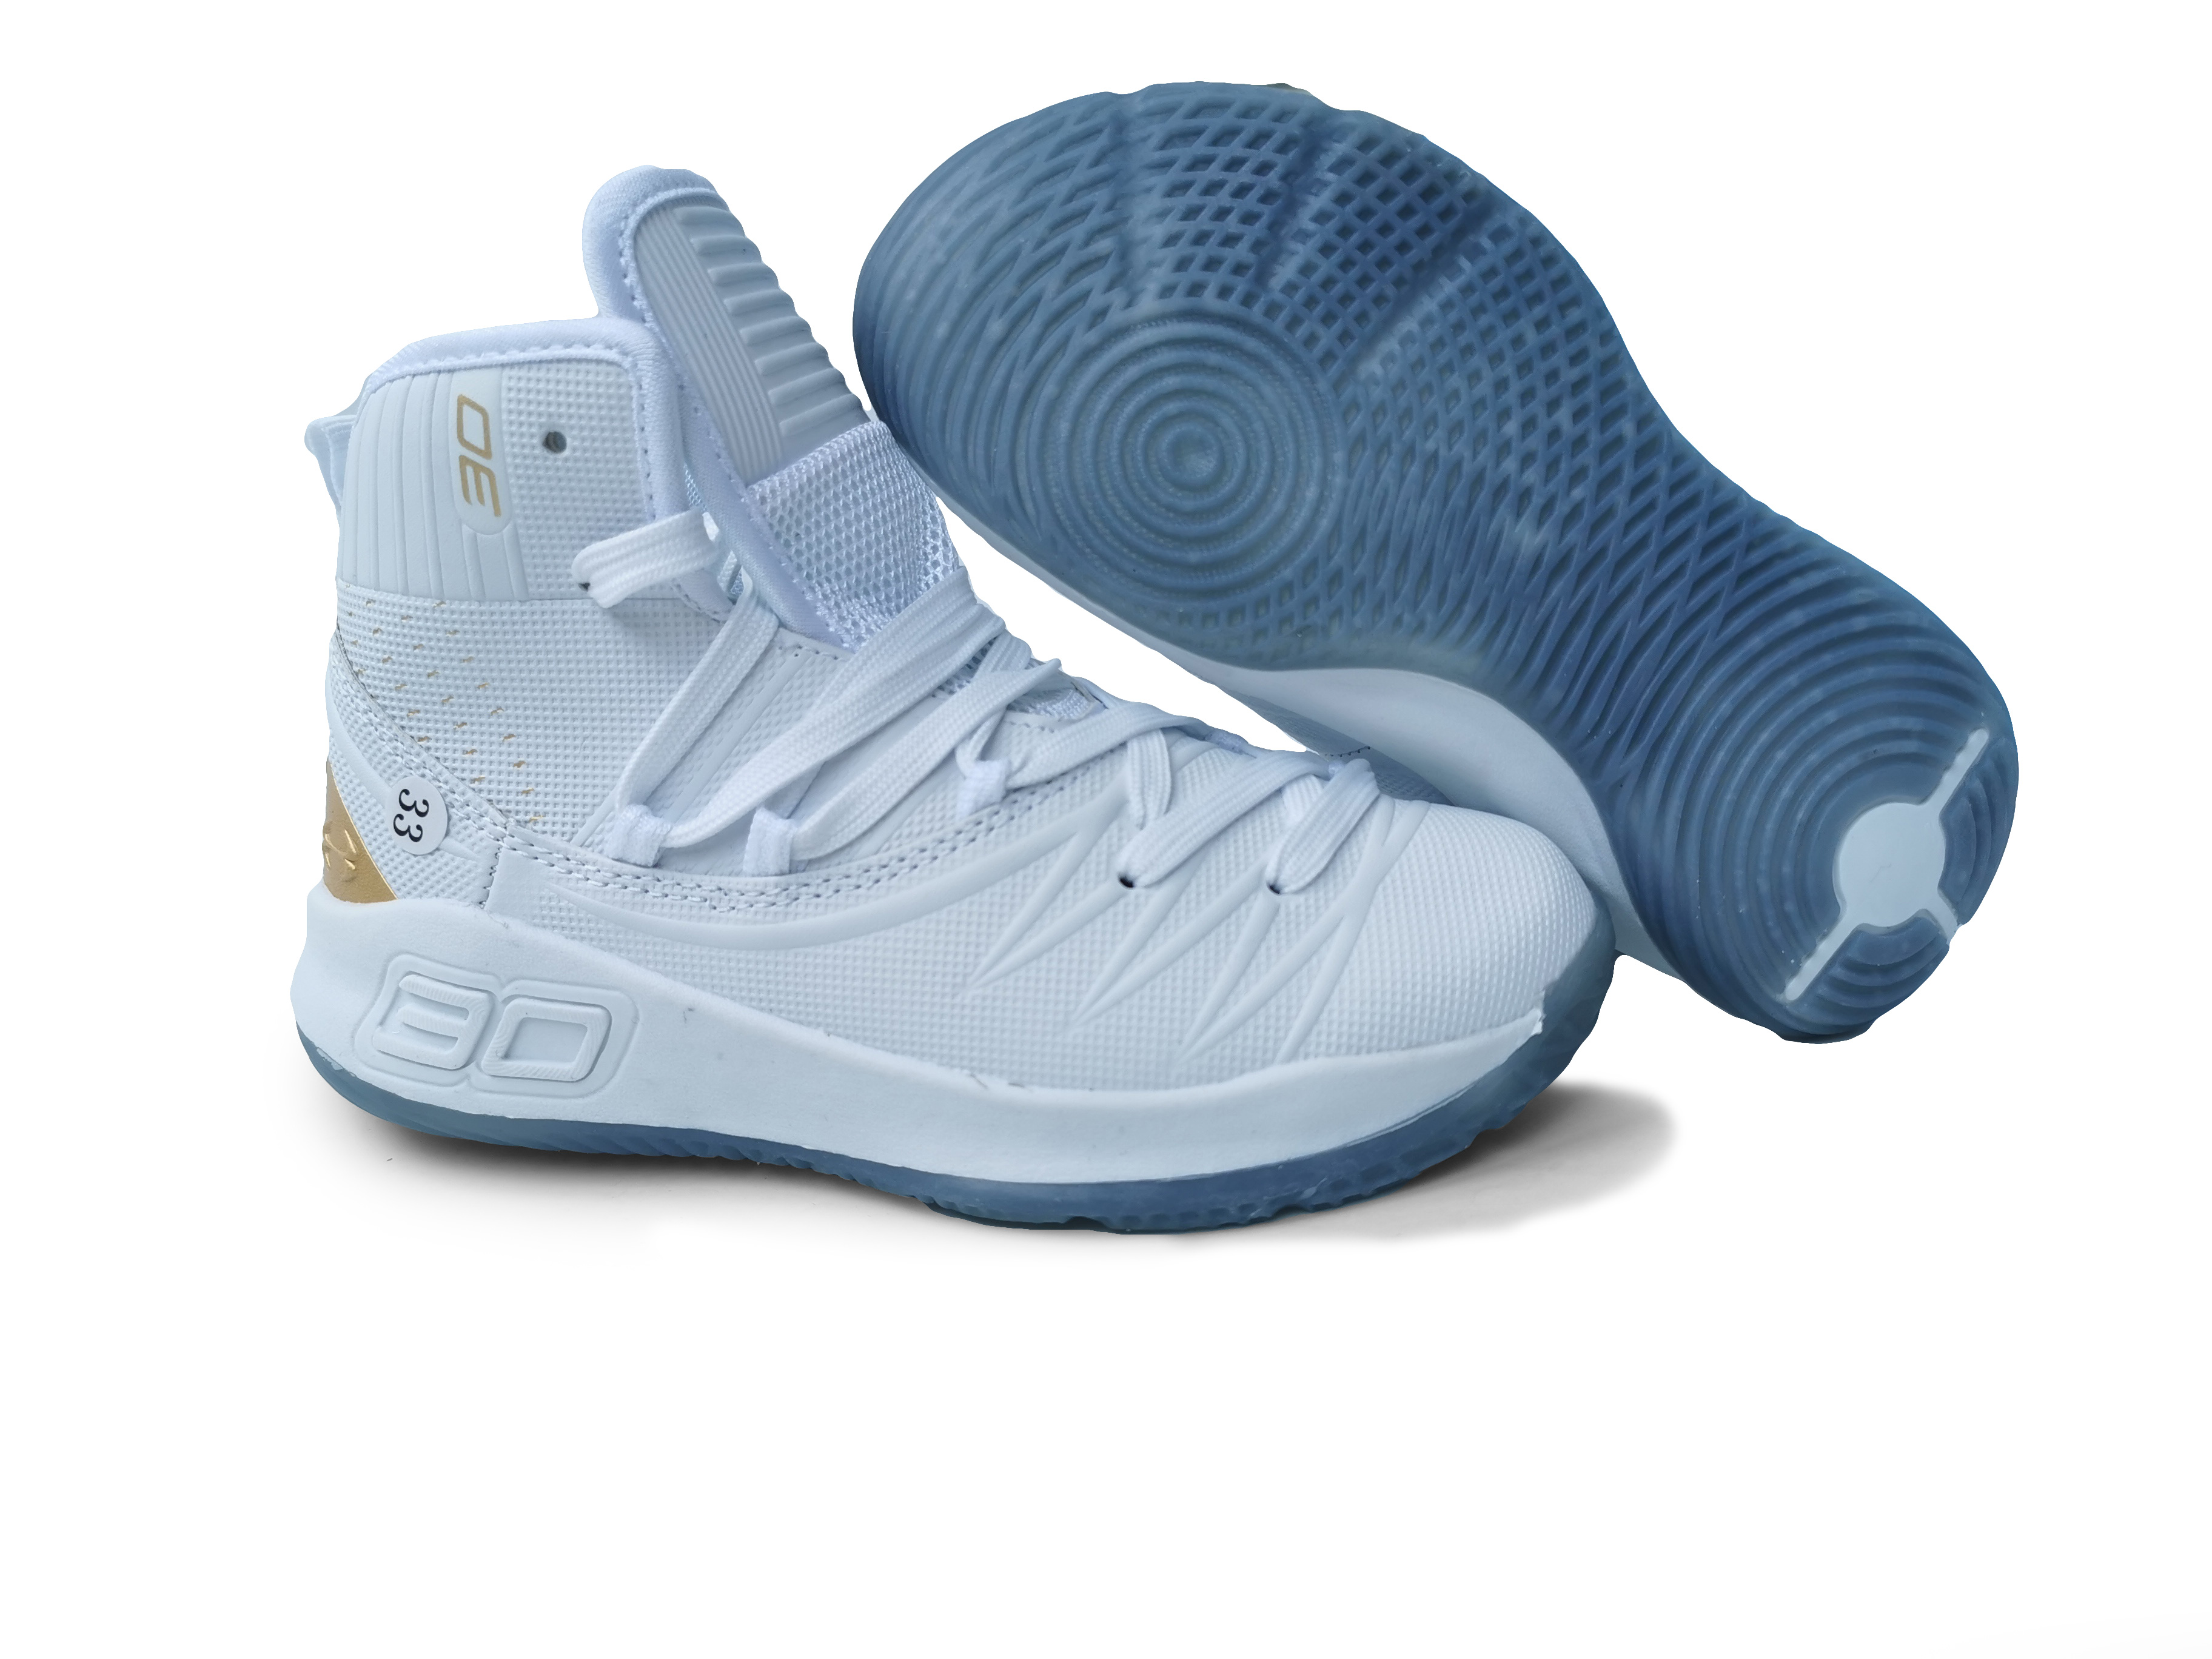 KD White Gold Basketball Shoes For KIDS 